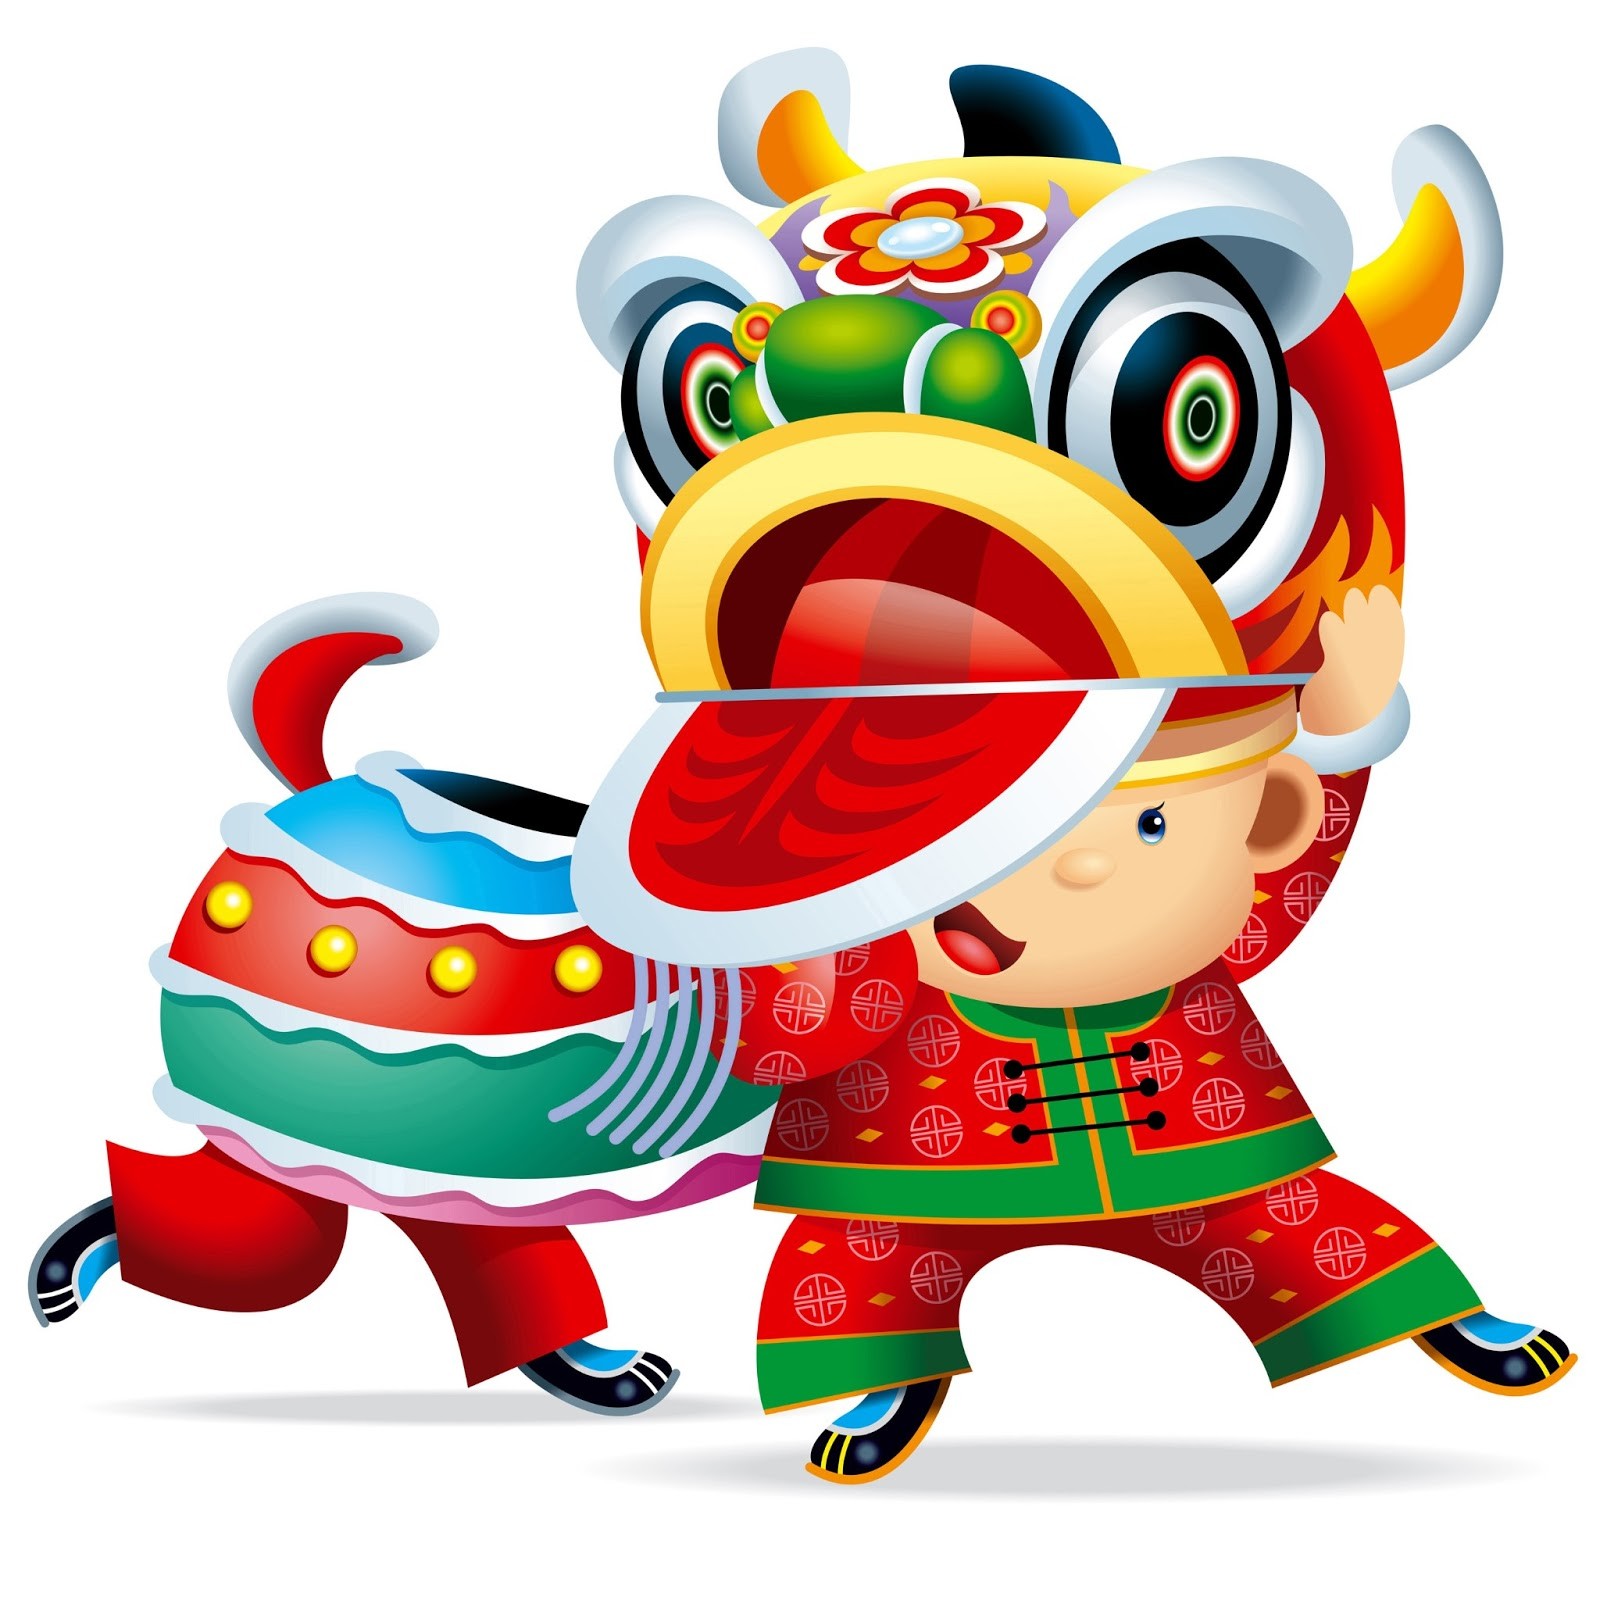 Chinese New Year Clip Art   Cliparts Co